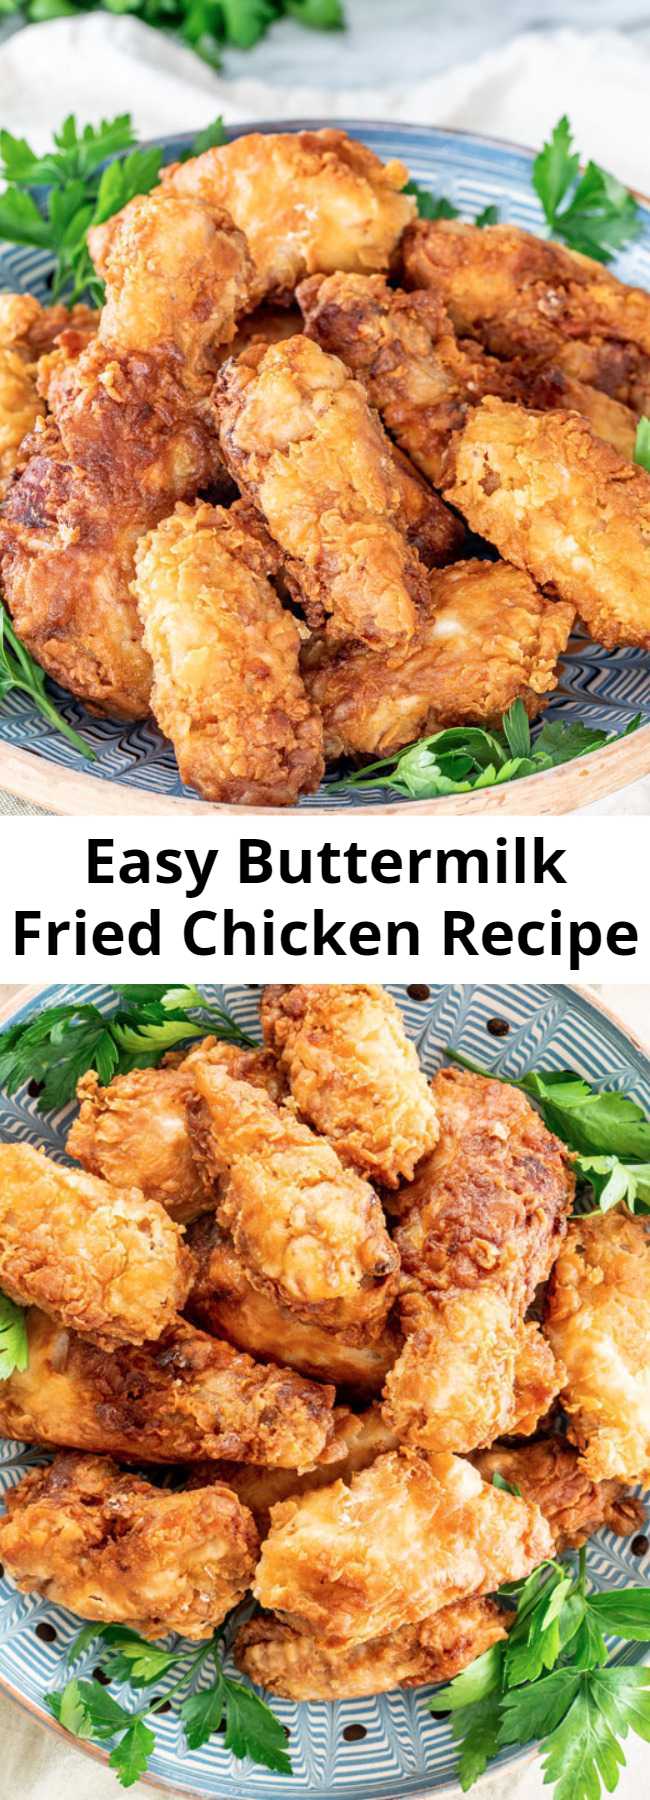 Easy Buttermilk Fried Chicken Recipe - This is the BEST EVER Buttermilk Fried Chicken! Super juicy and tender on the inside yet crispy on the outside and bursting with flavor! Perfect for lunch or dinner and served with a side salad.